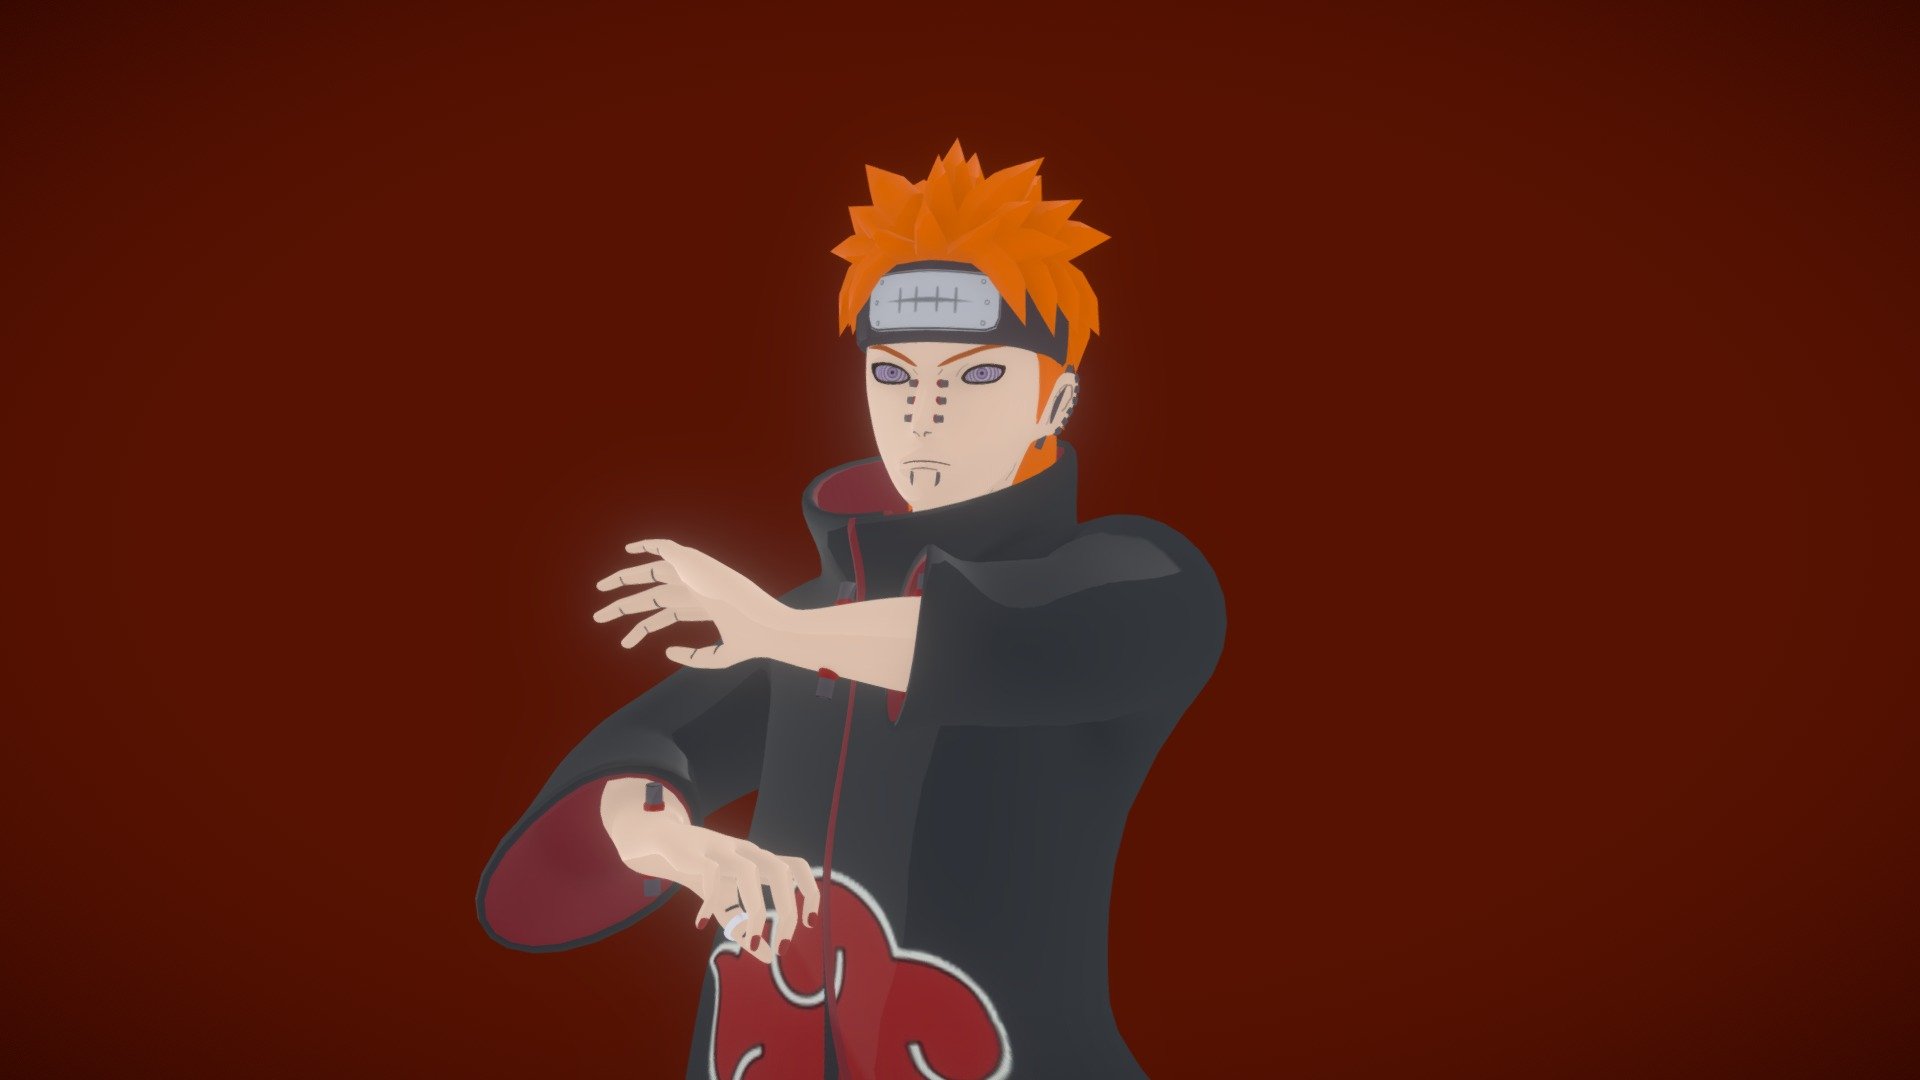 This is a 3D Model of Pain, from Naruto, created from the ground up, this model is based on the anime series, it tries to have the same feeling as the Anime but also based slightly on the Storm series model.

This model is part of a yearly collection of 3D Fan Characters I’m doing, this is part of Month 8 of said collection, if you want to check out the timelapse of this model or even see the other characters I’ll be making, you can do so in my social media!

3D Printable Version Features

3D Printable Version of the character, this is what this version includes. 
-STL of detached parts for an easier print (Legs, Body, Head) 
-Instructions

Download the additional files for the complete version (Separate parts, instructions)

Rigged Version

https://skfb.ly/oNtzQ - Pain (Naruto Shippuden) - 3D Printable - Buy Royalty Free 3D model by maisth 3d model